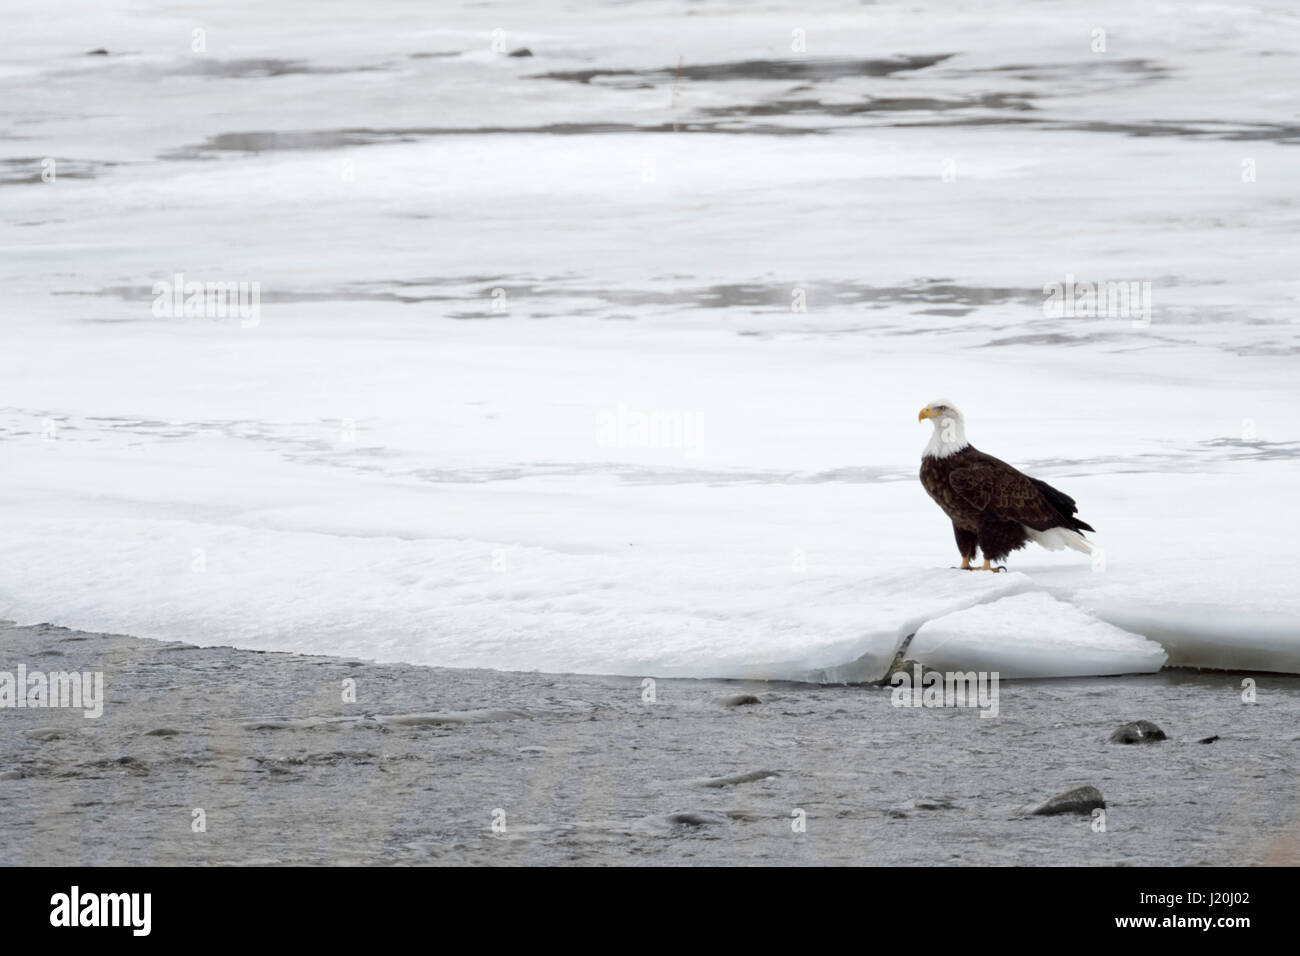 Bald Eagle / Weisskopfseeadler ( Haliaeetus leucocephalus ) in winter, sitting on the icy and snow covered bank of Yellowstone river, Montana, USA. Stock Photo